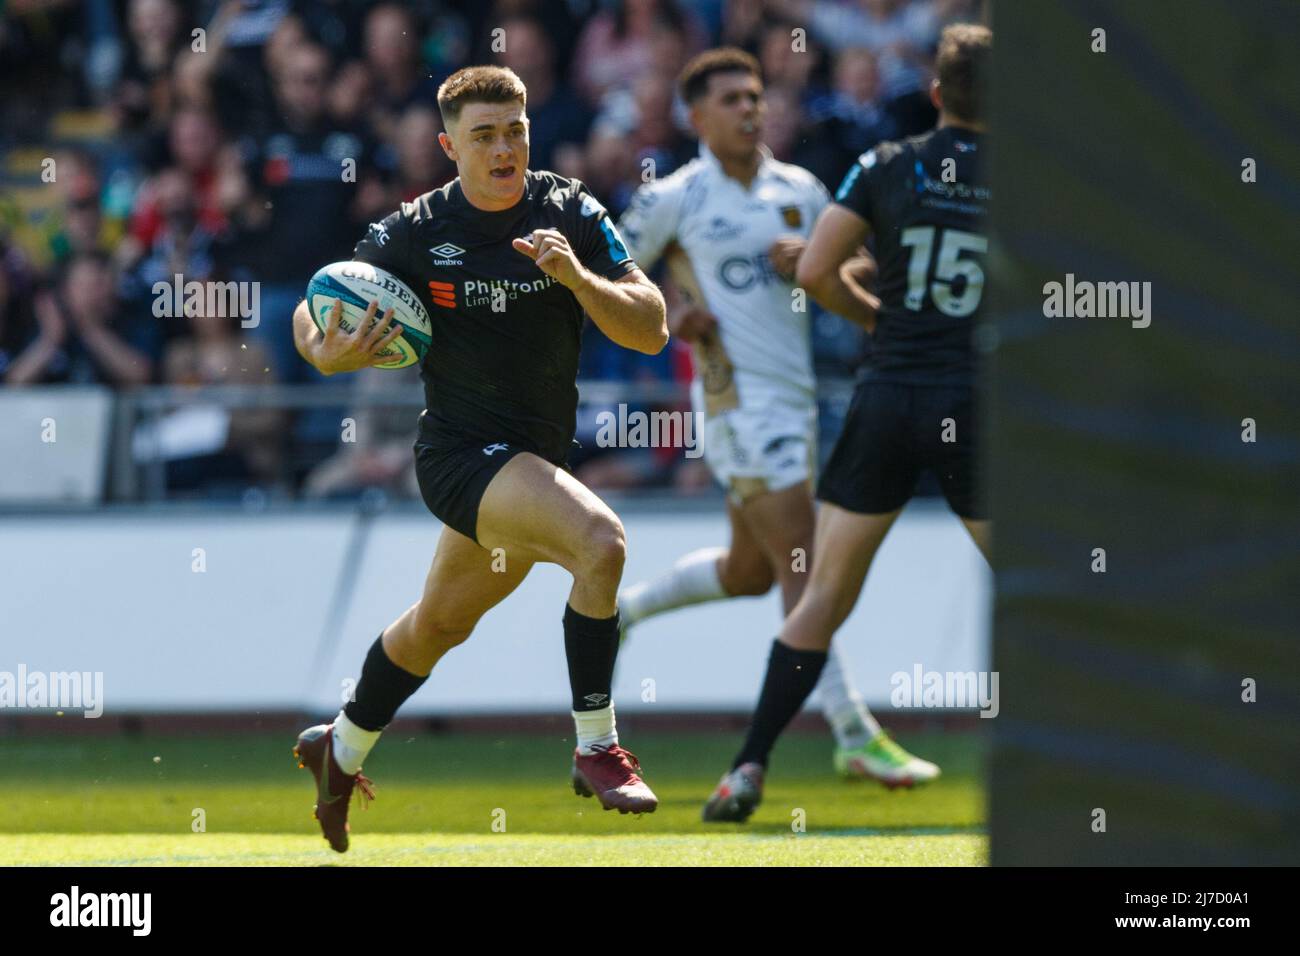 Swansea, UK. 8 May, 2022. Reuben Morgan-Williams of Ospreys runs in to score a try during the Ospreys v Dragons United Rugby Championship Match. Credit: Gruffydd ThomasAlamy Stock Photo